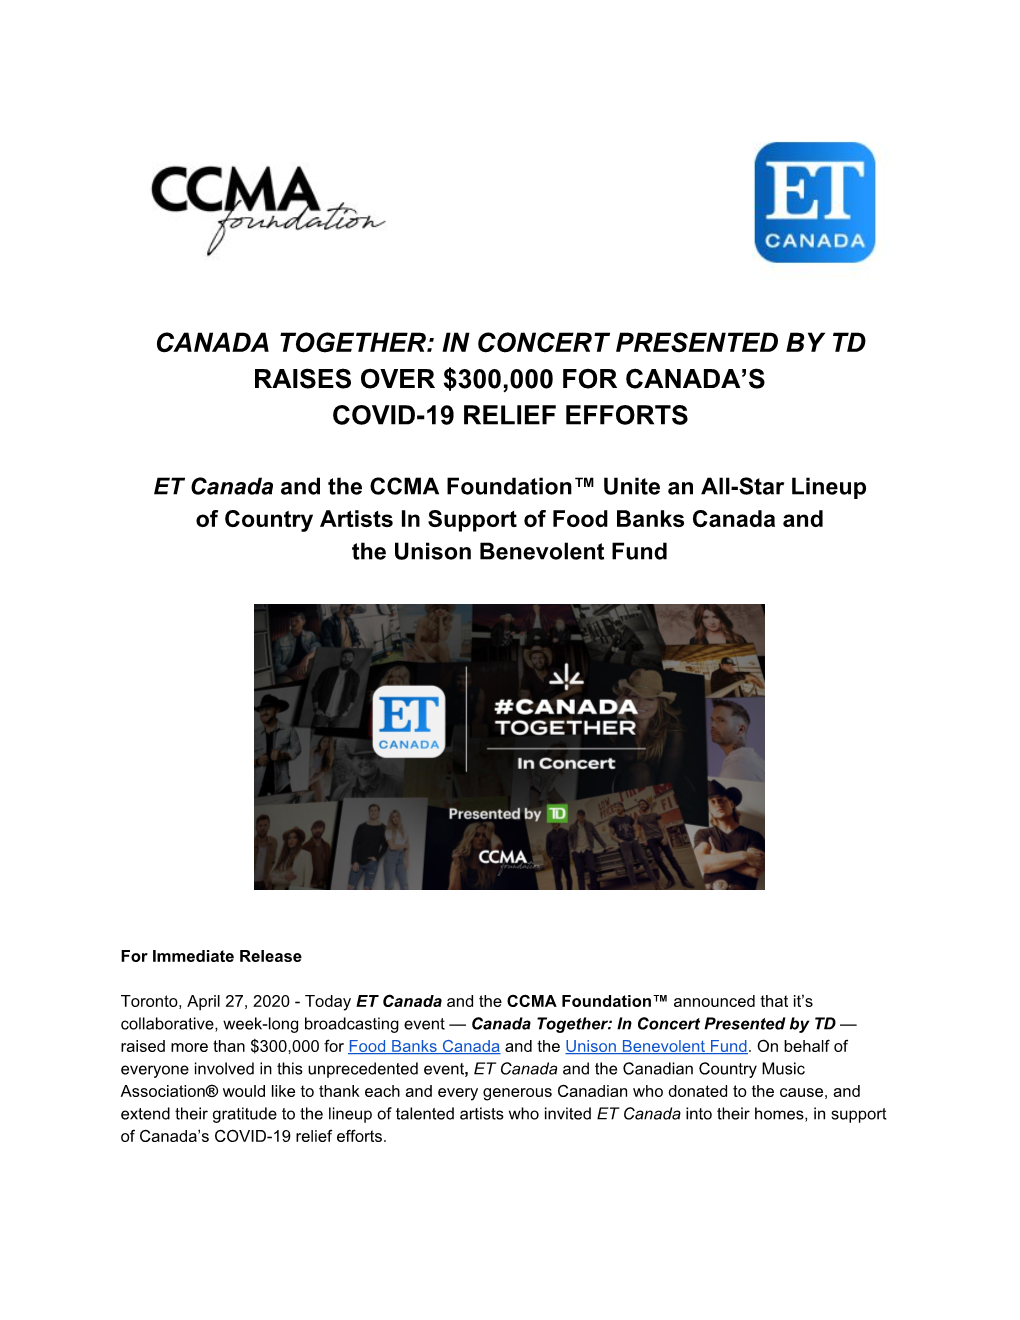 Canada Together: in Concert Presented by Td Raises Over $300,000 for Canada’S Covid-19 Relief Efforts